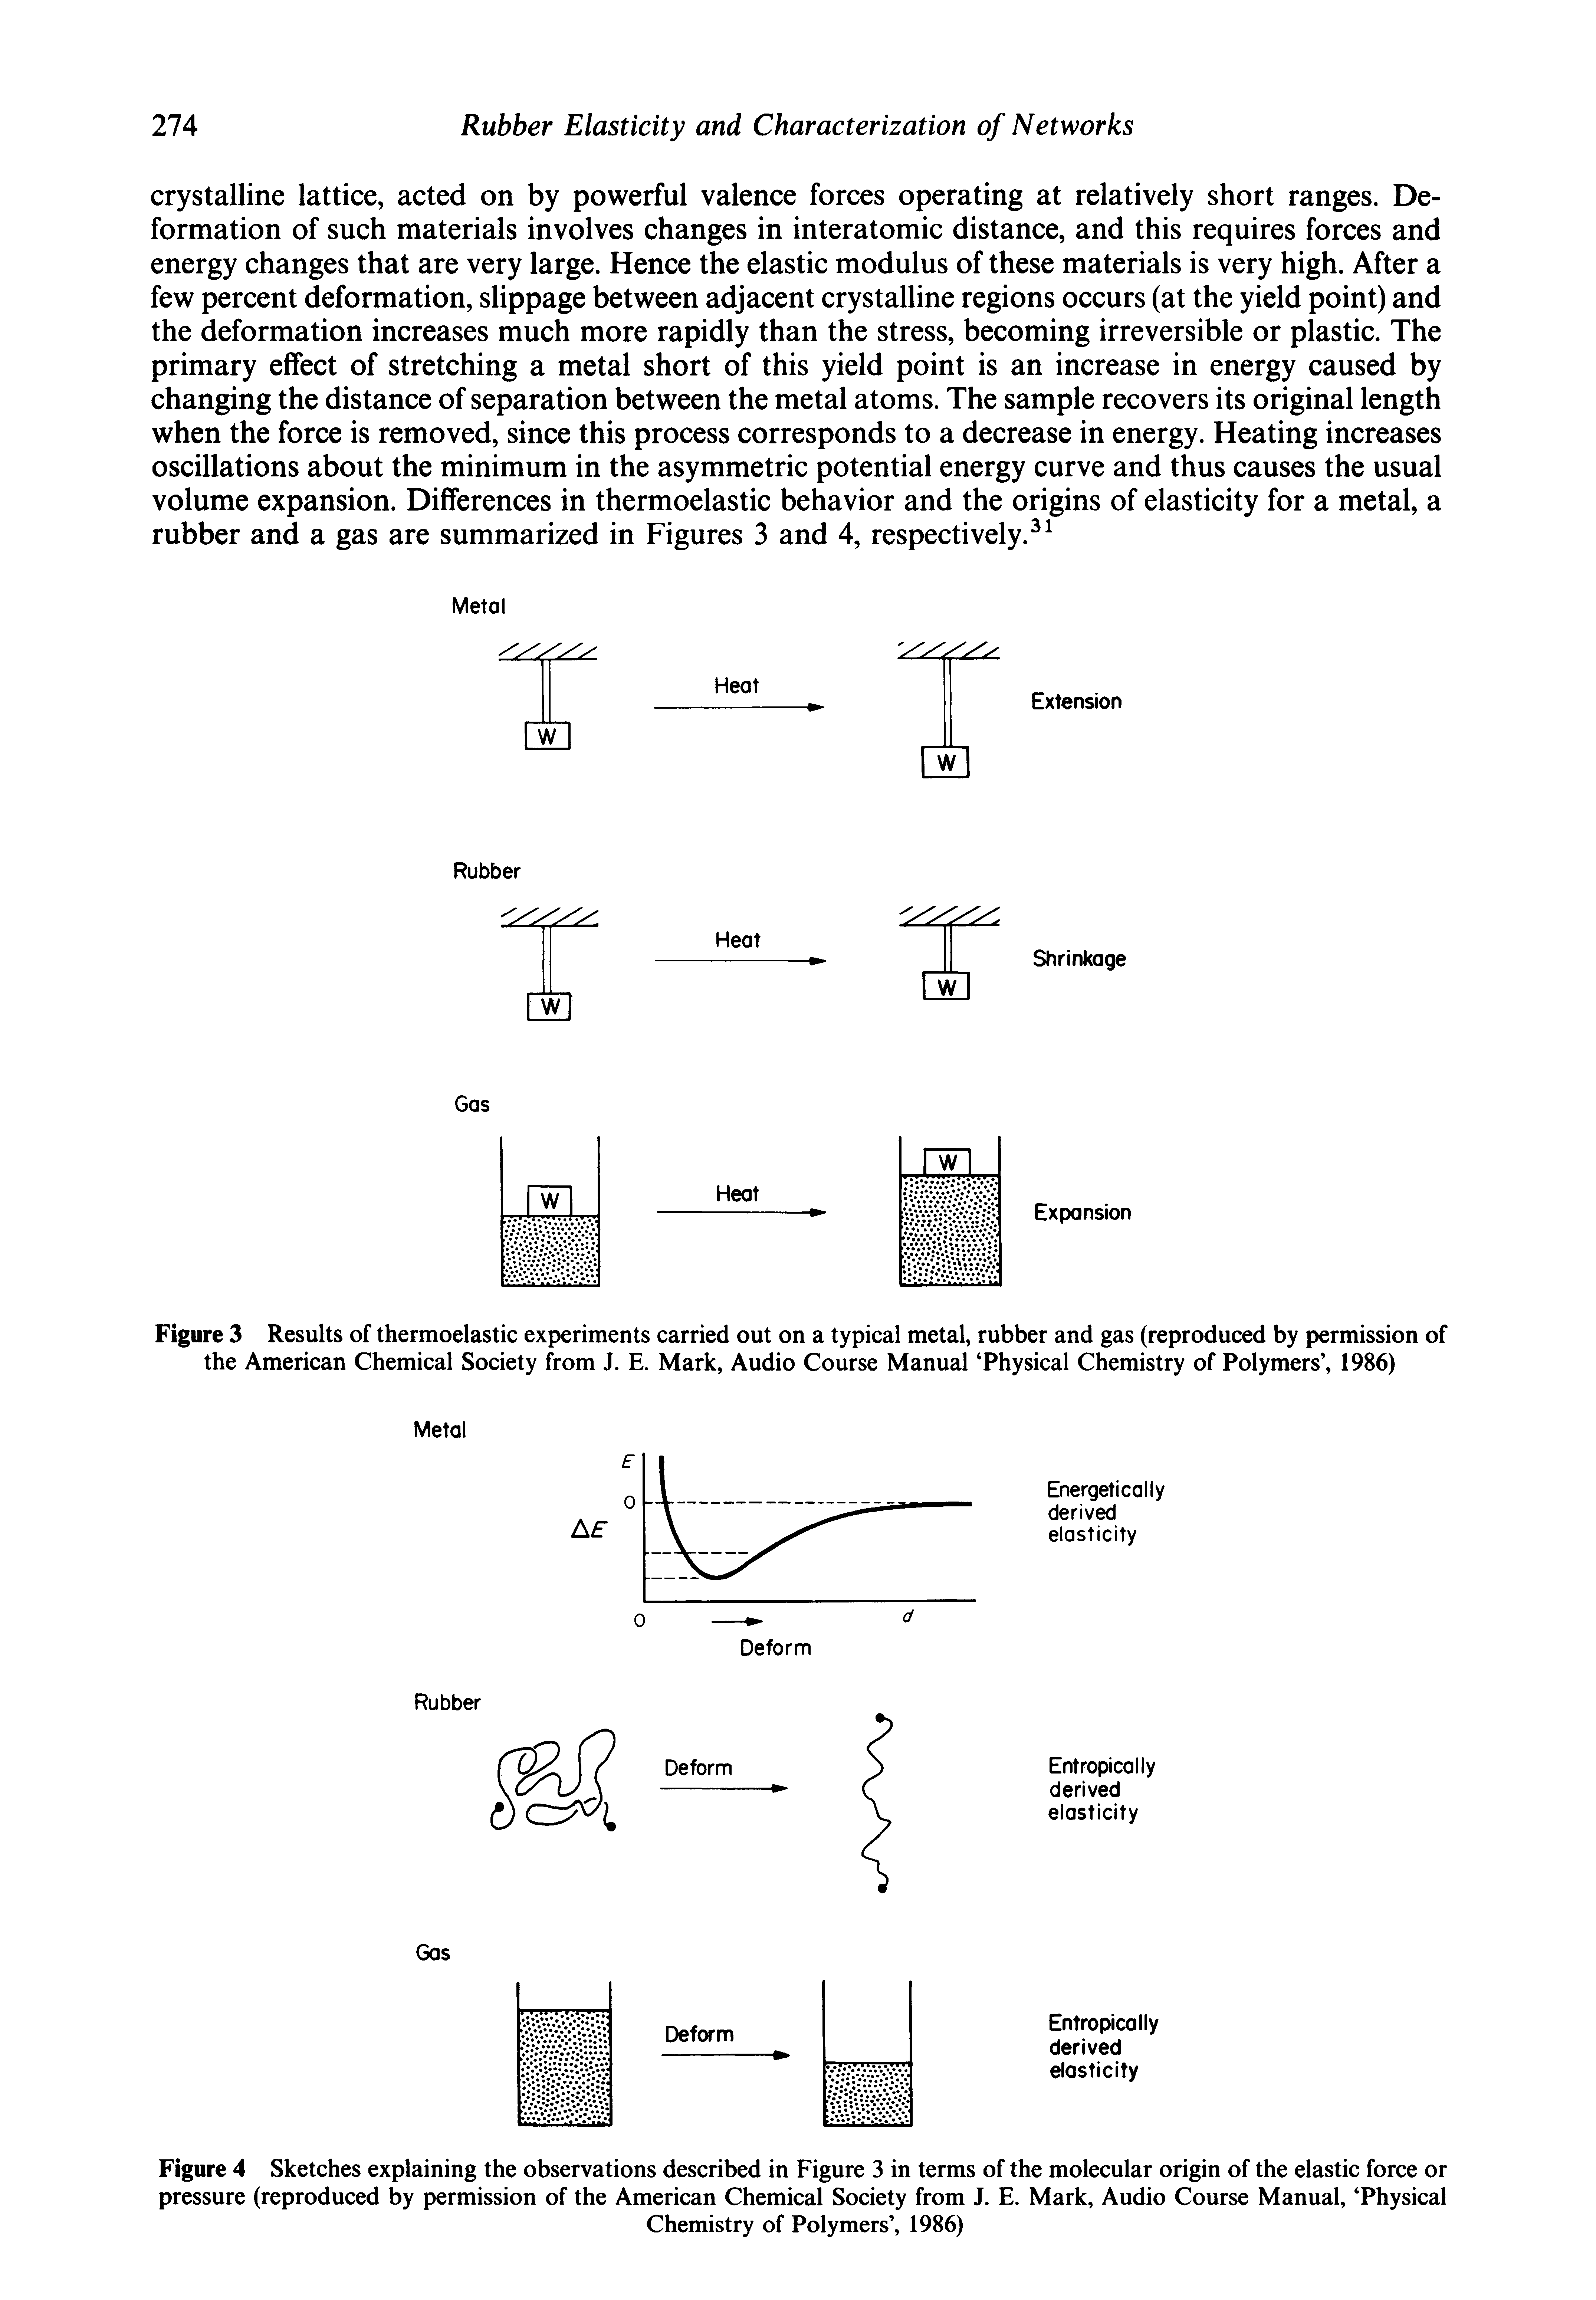 Figure 3 Results of thermoelastic experiments carried out on a typical metal, rubber and gas (reproduced by permission of the American Chemical Society from J. E. Mark, Audio Course Manual Physical Chemistry of Polymers , 1986)...